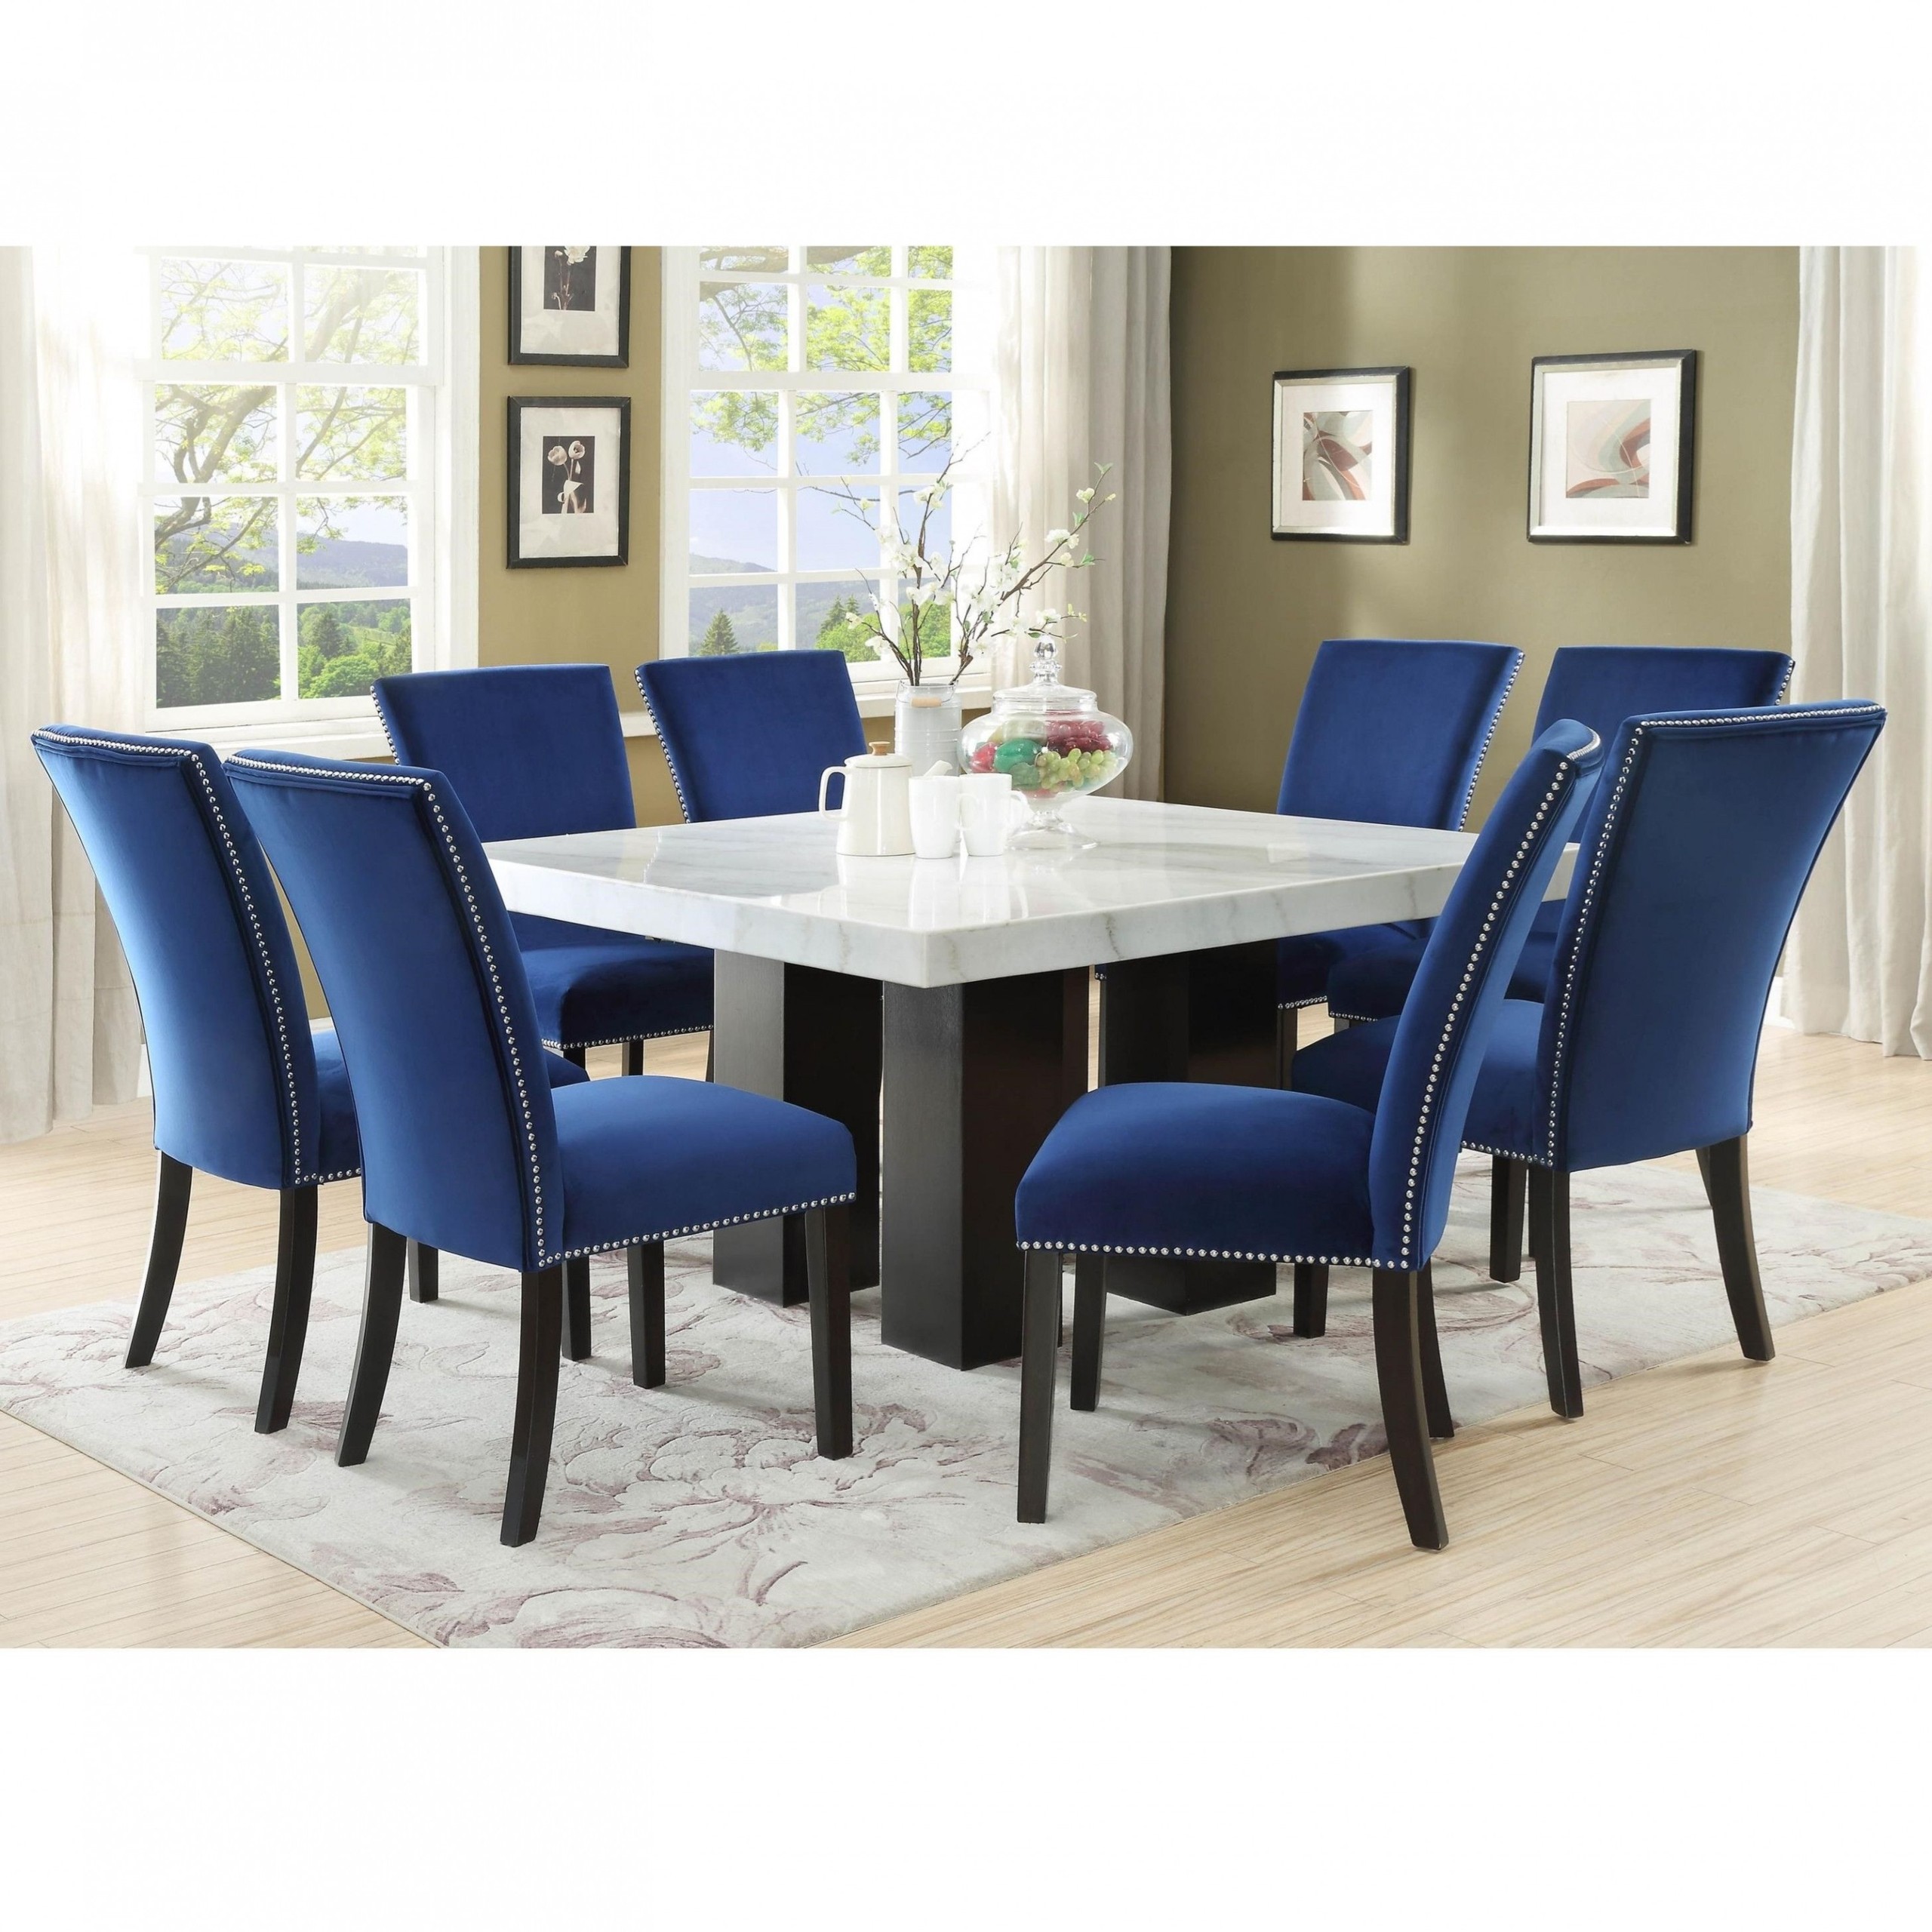 Top 11 trends in 11 piece dining room set to